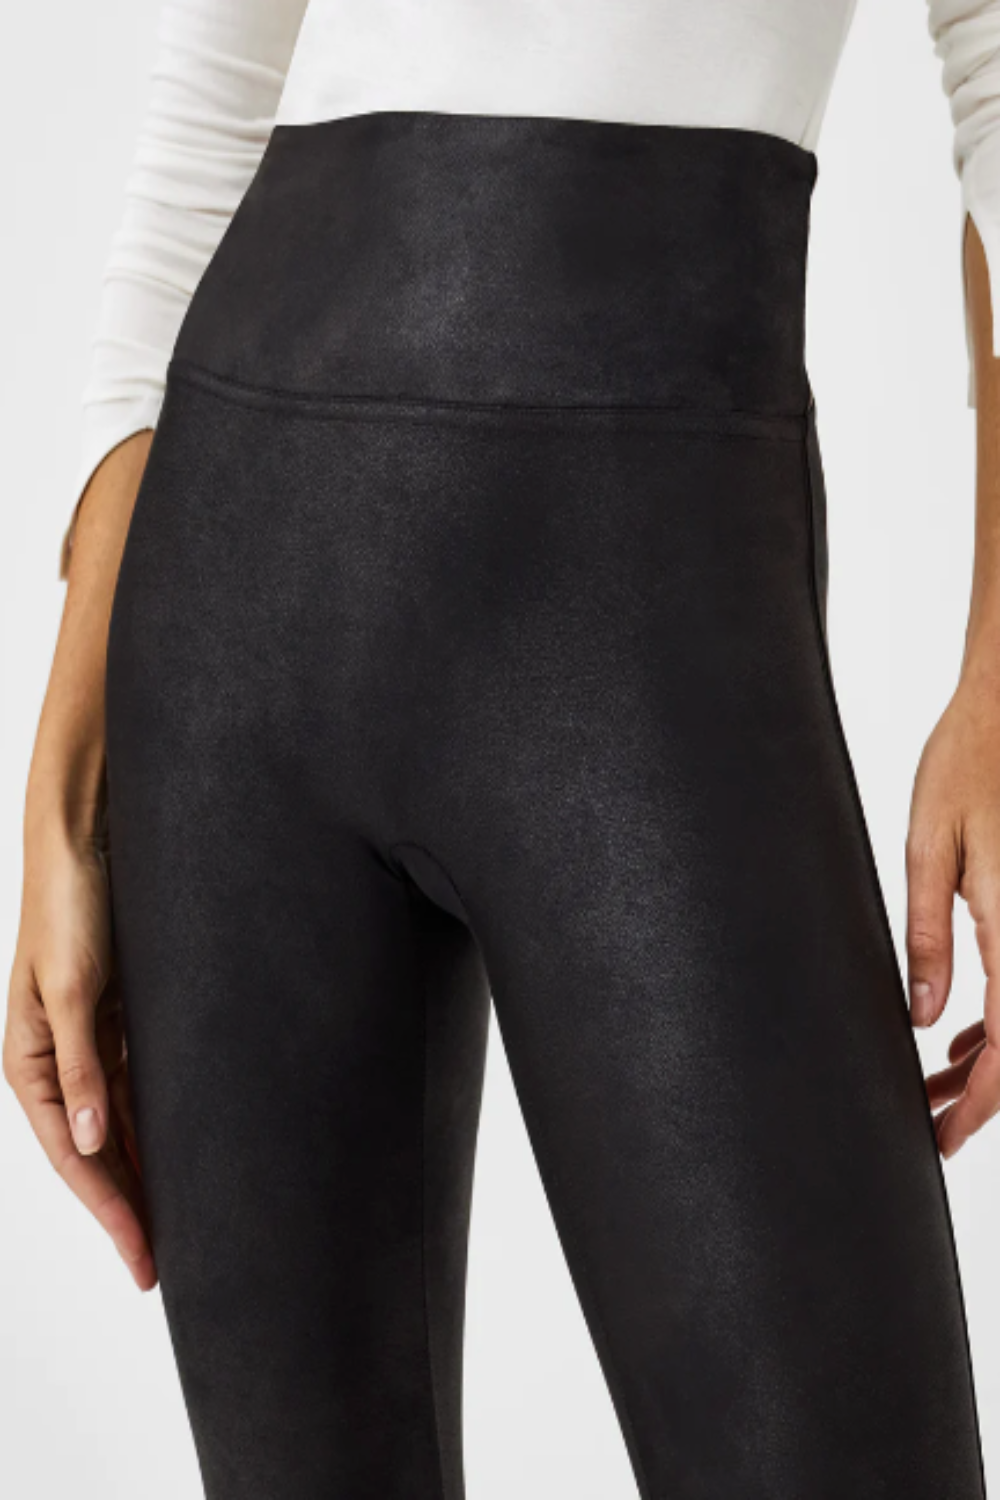 Shop Recycled Fleece Lined Tights in Black | Max Women's Fashion NZ